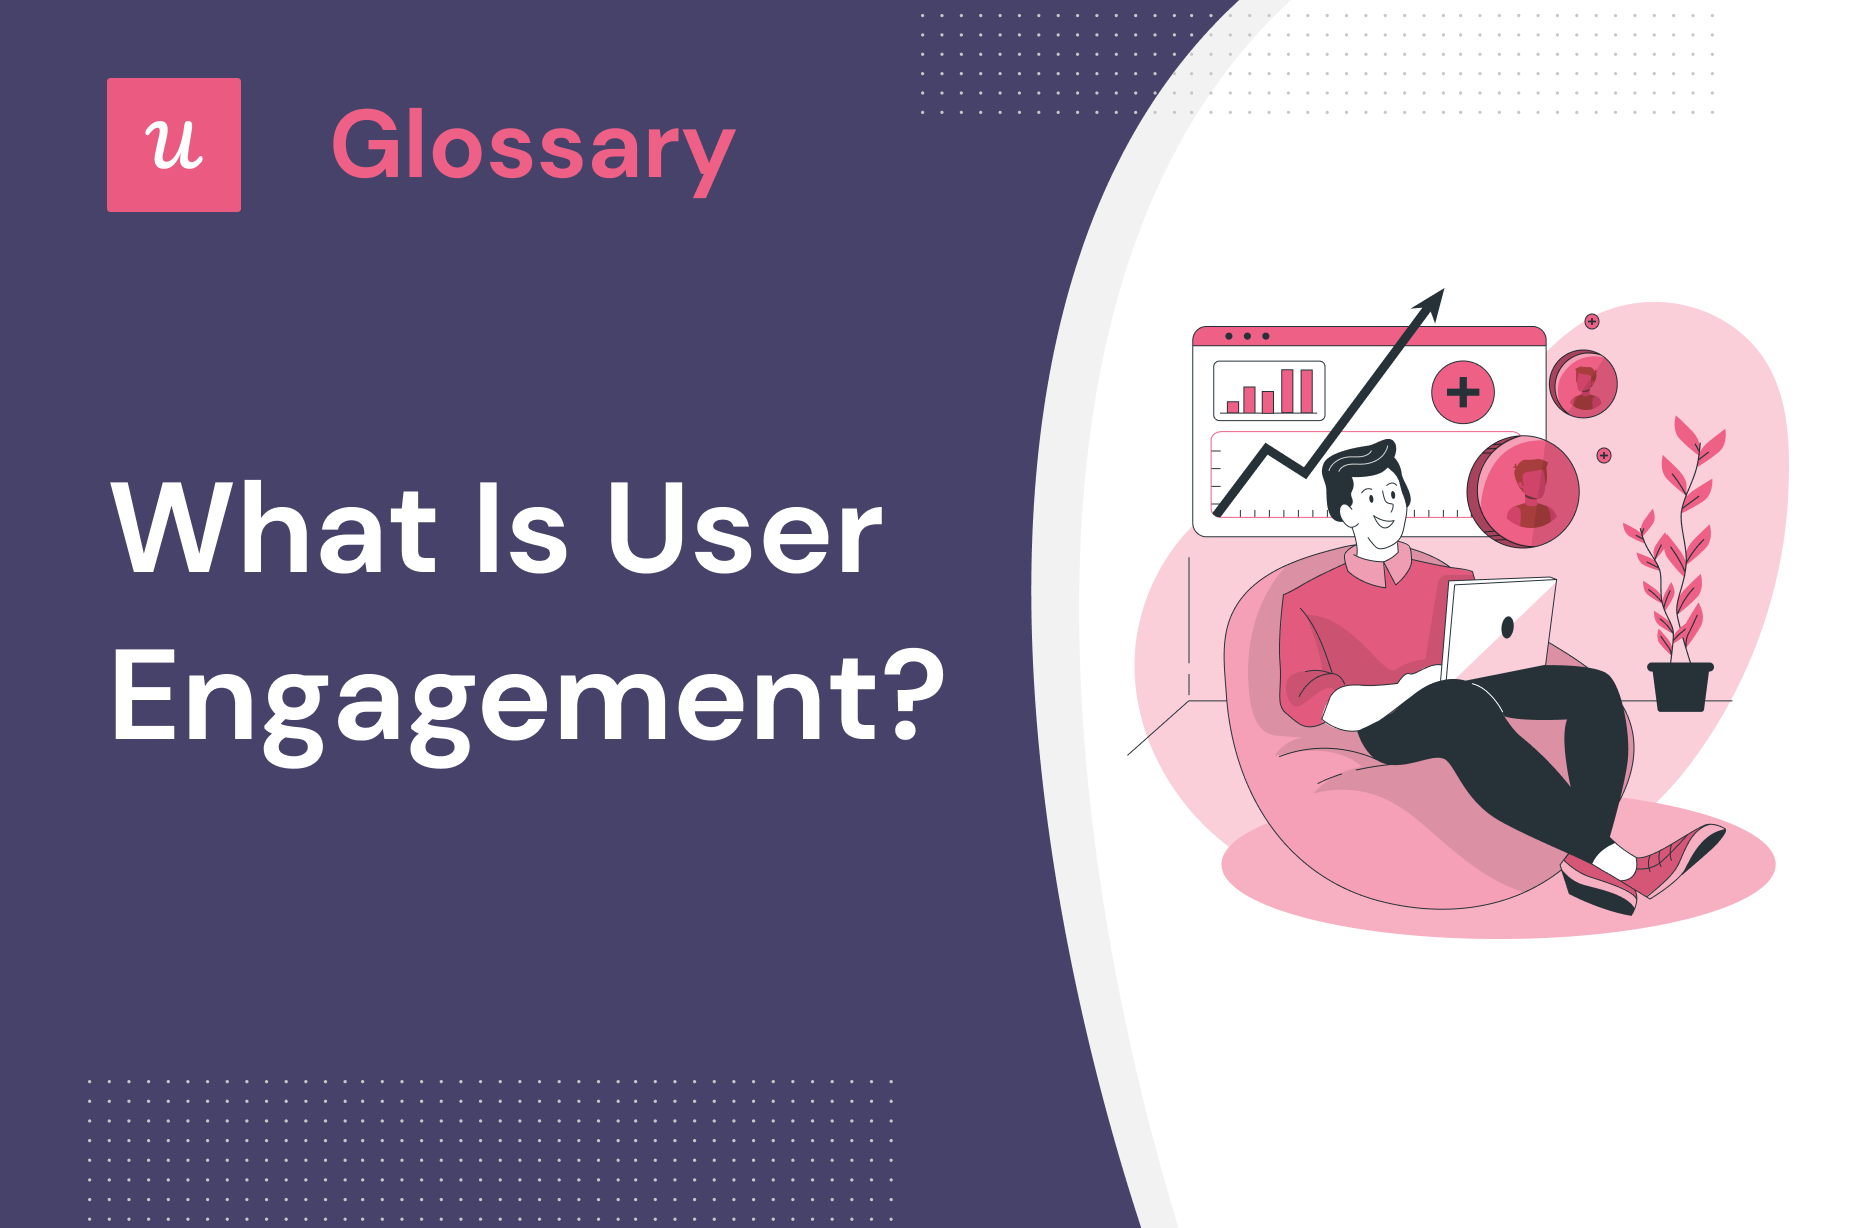 What is User Engagement?